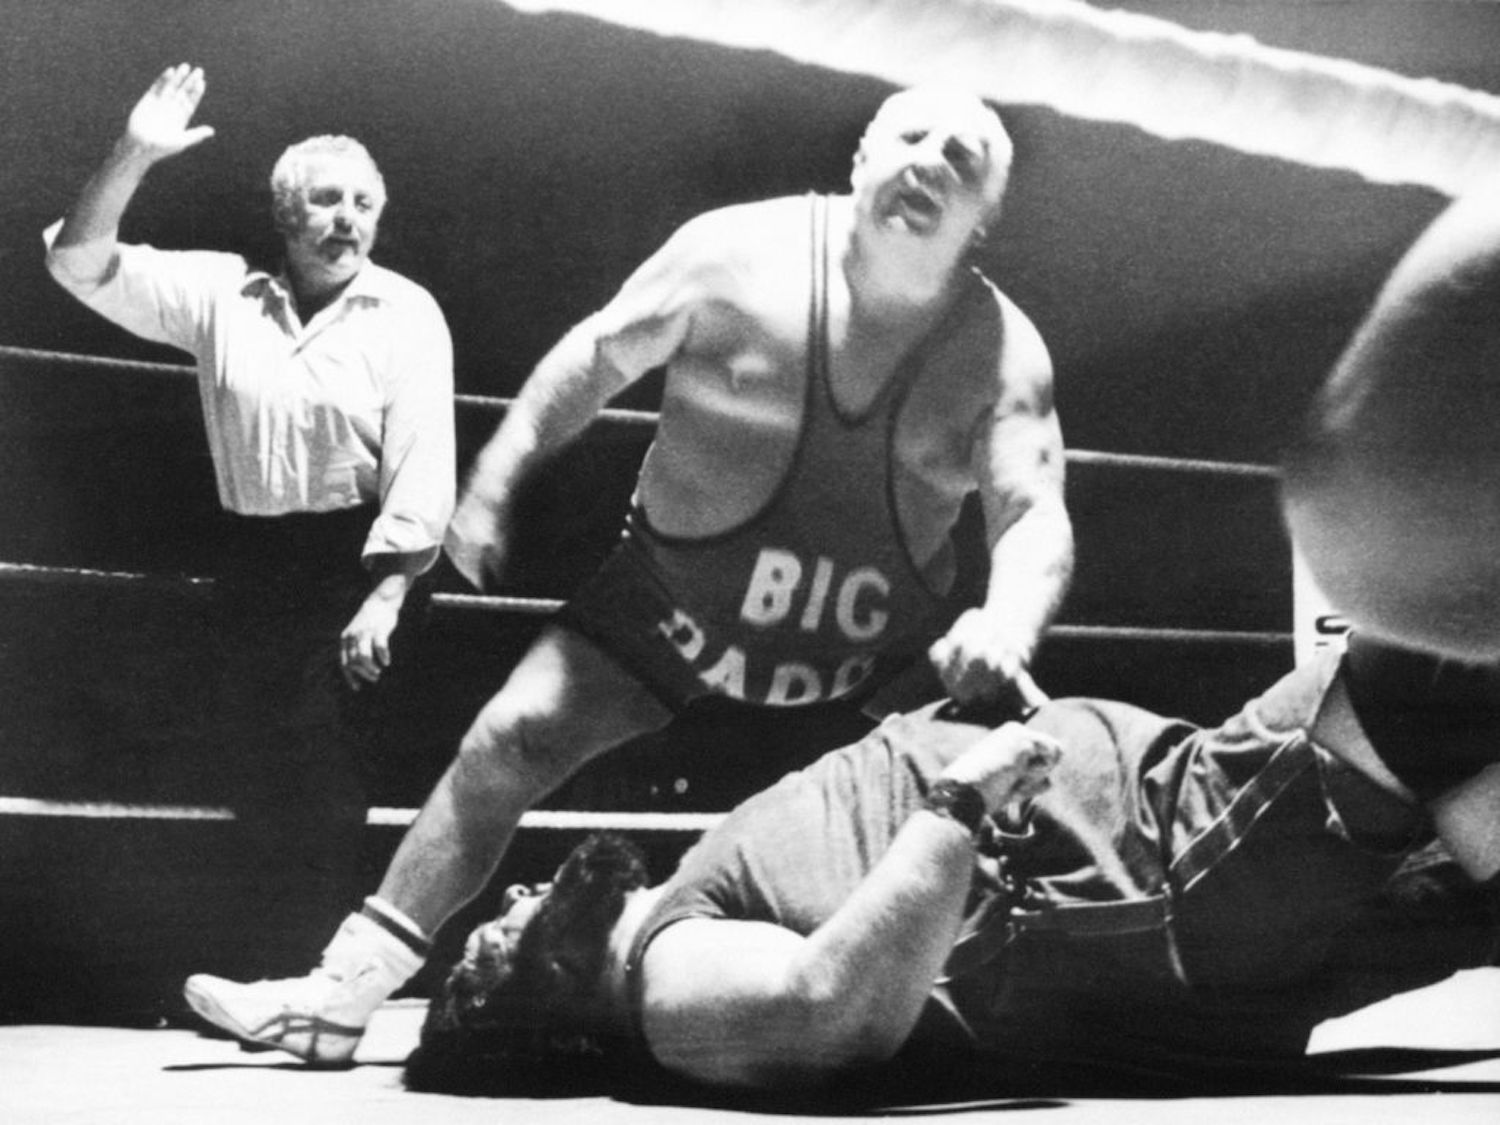 A normal tag team between Malcolm "King Kong" Kirk and Shirley "Big Daddy" Crabtree turned tragic in August 1987.